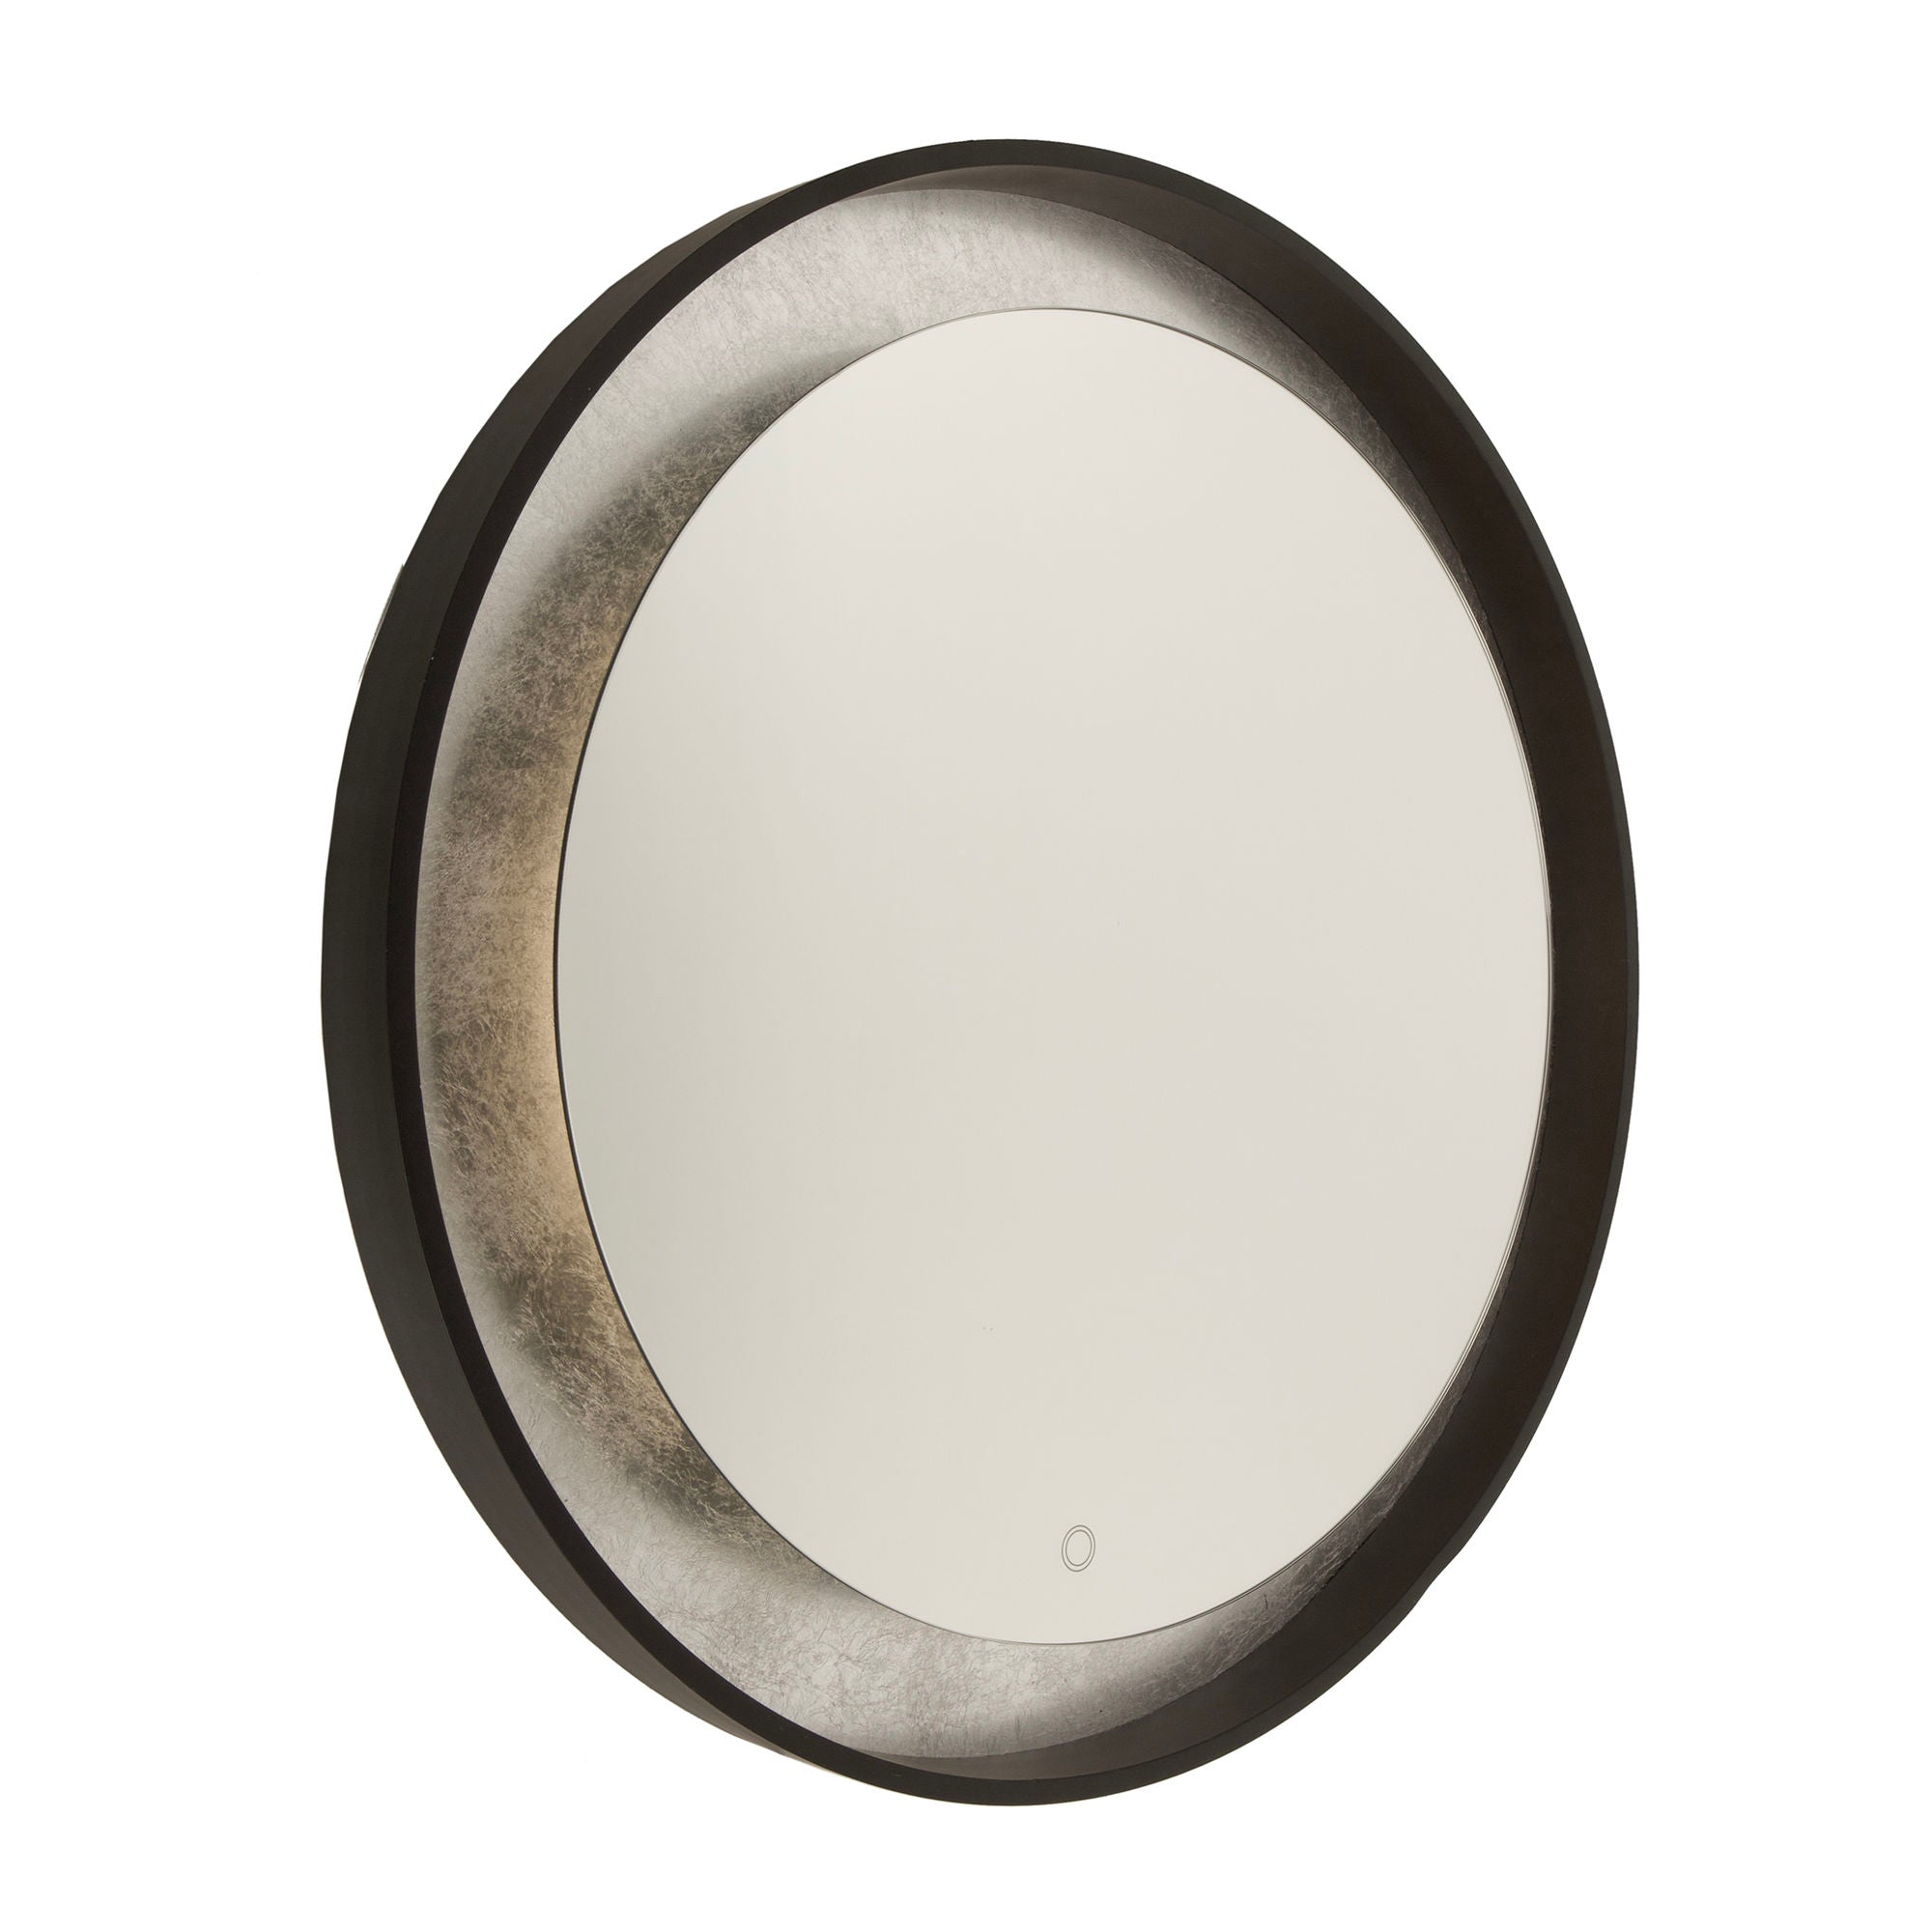 Reflections Mirror Bronze, Stainless steel INTEGRATED LED - AM305 | ARTCRAFT